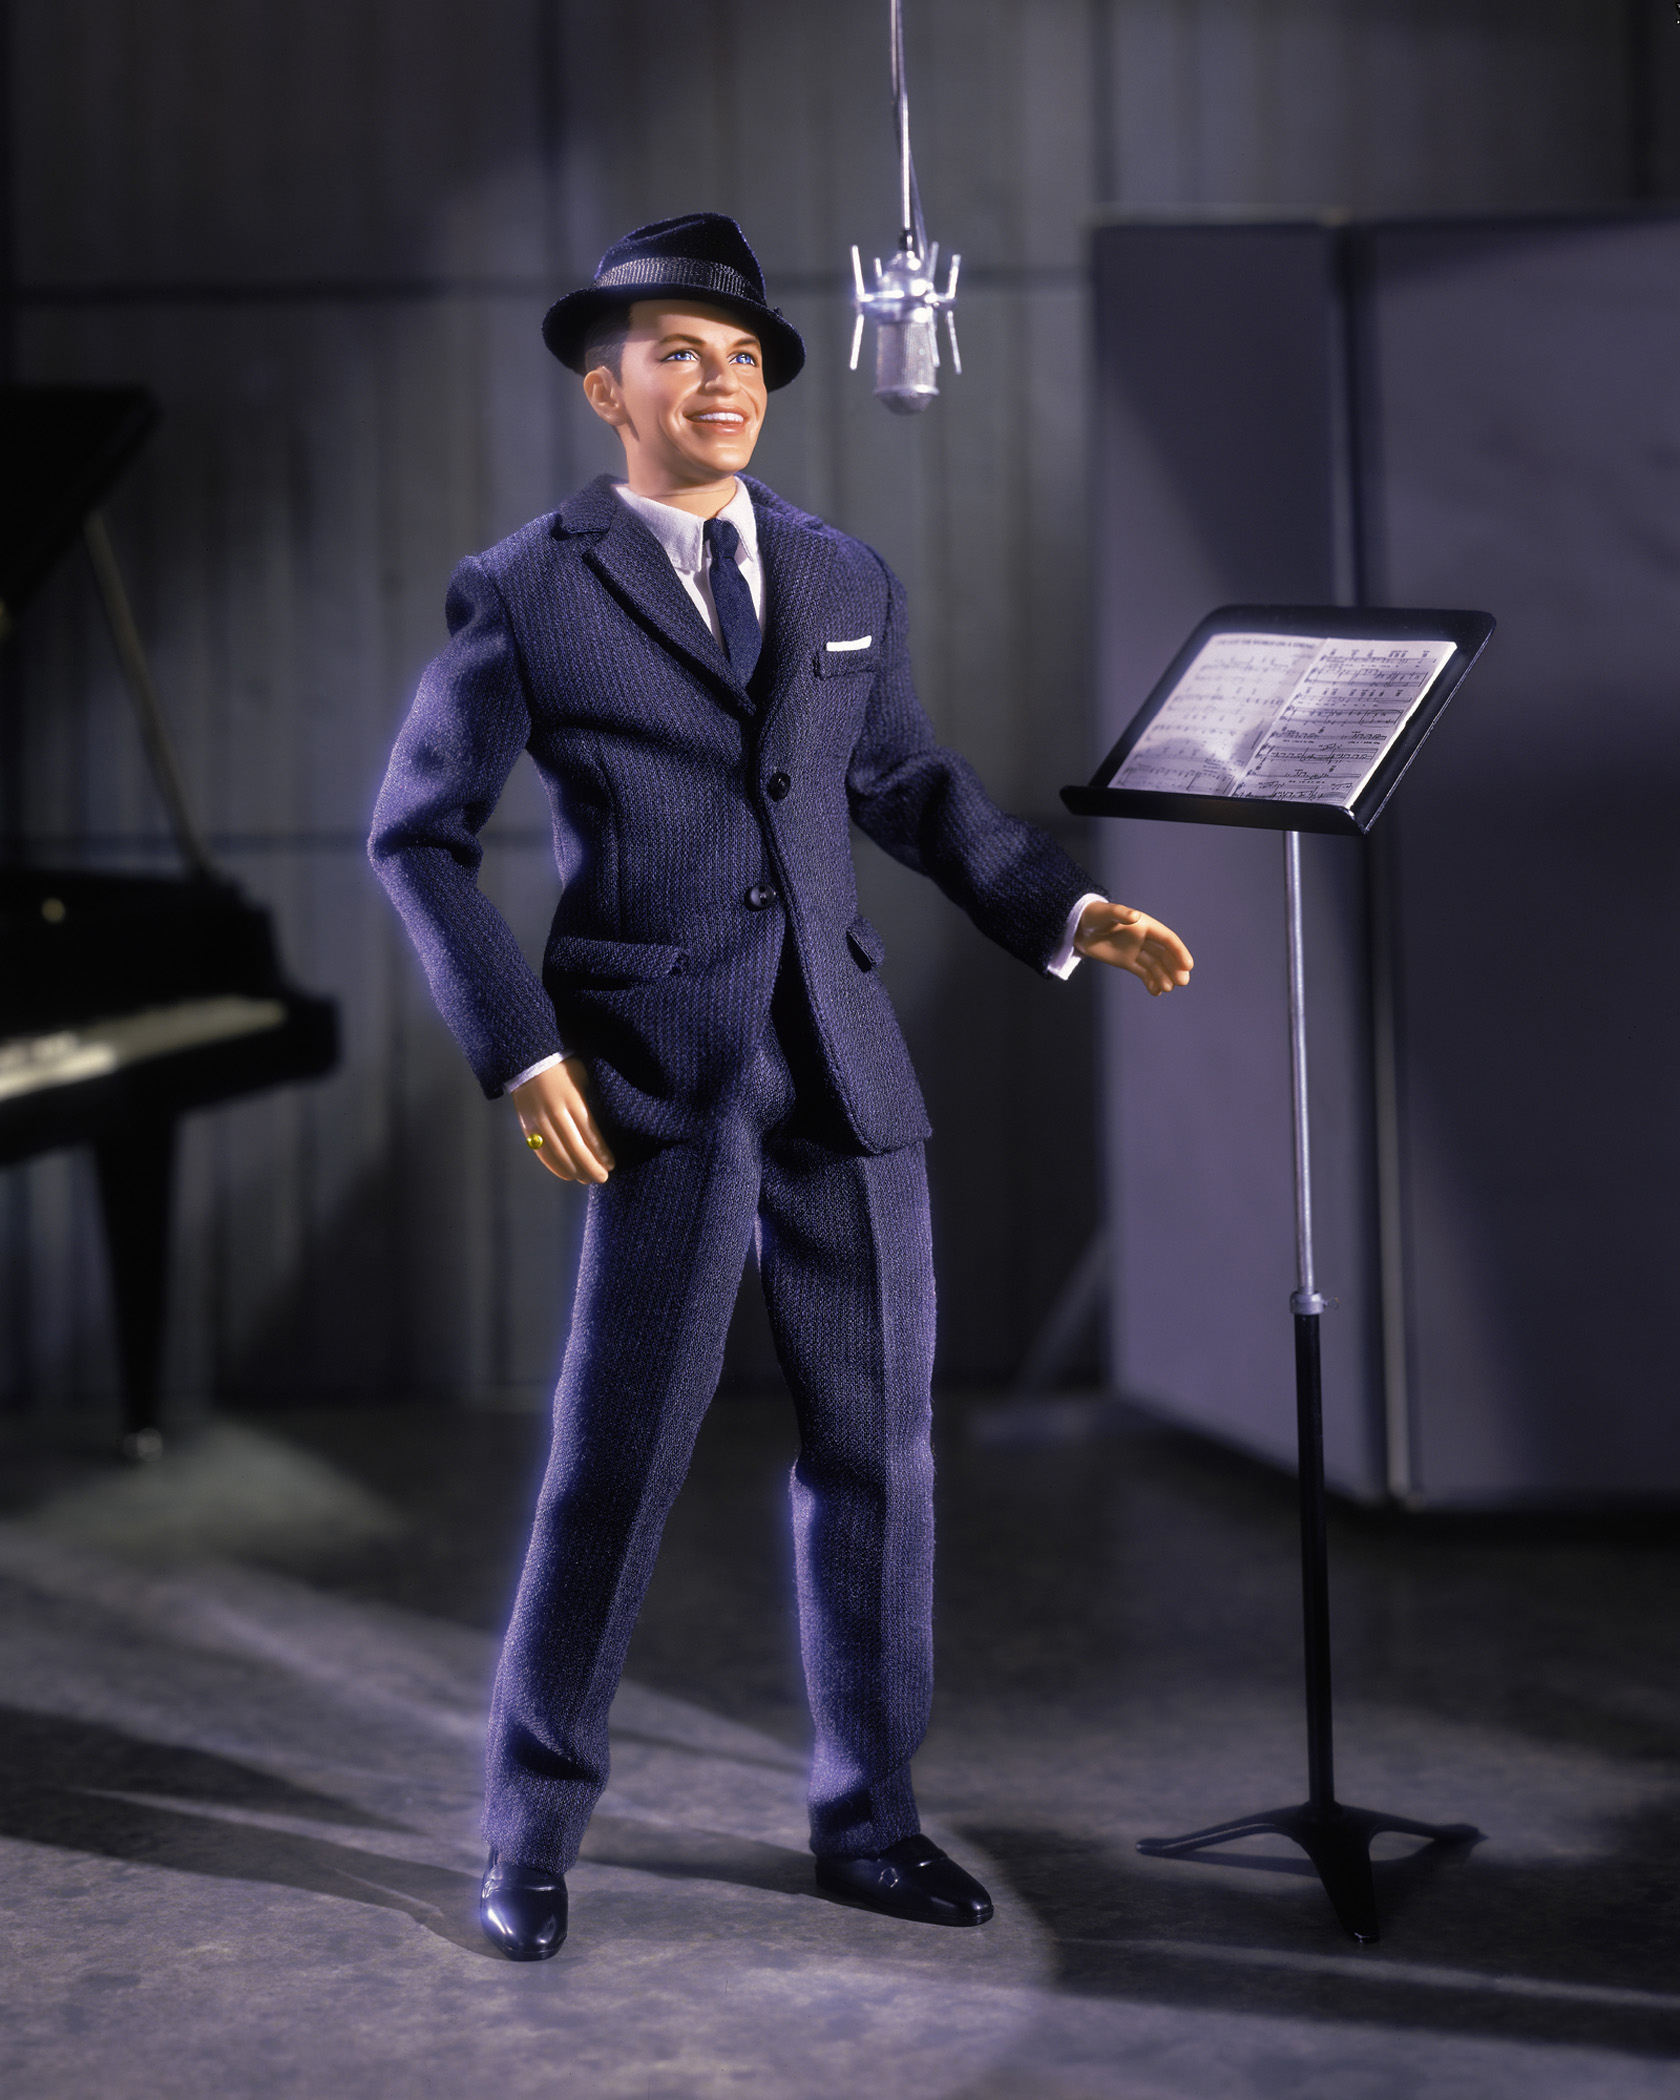 The Frank Sinatra Doll, released in 2000.